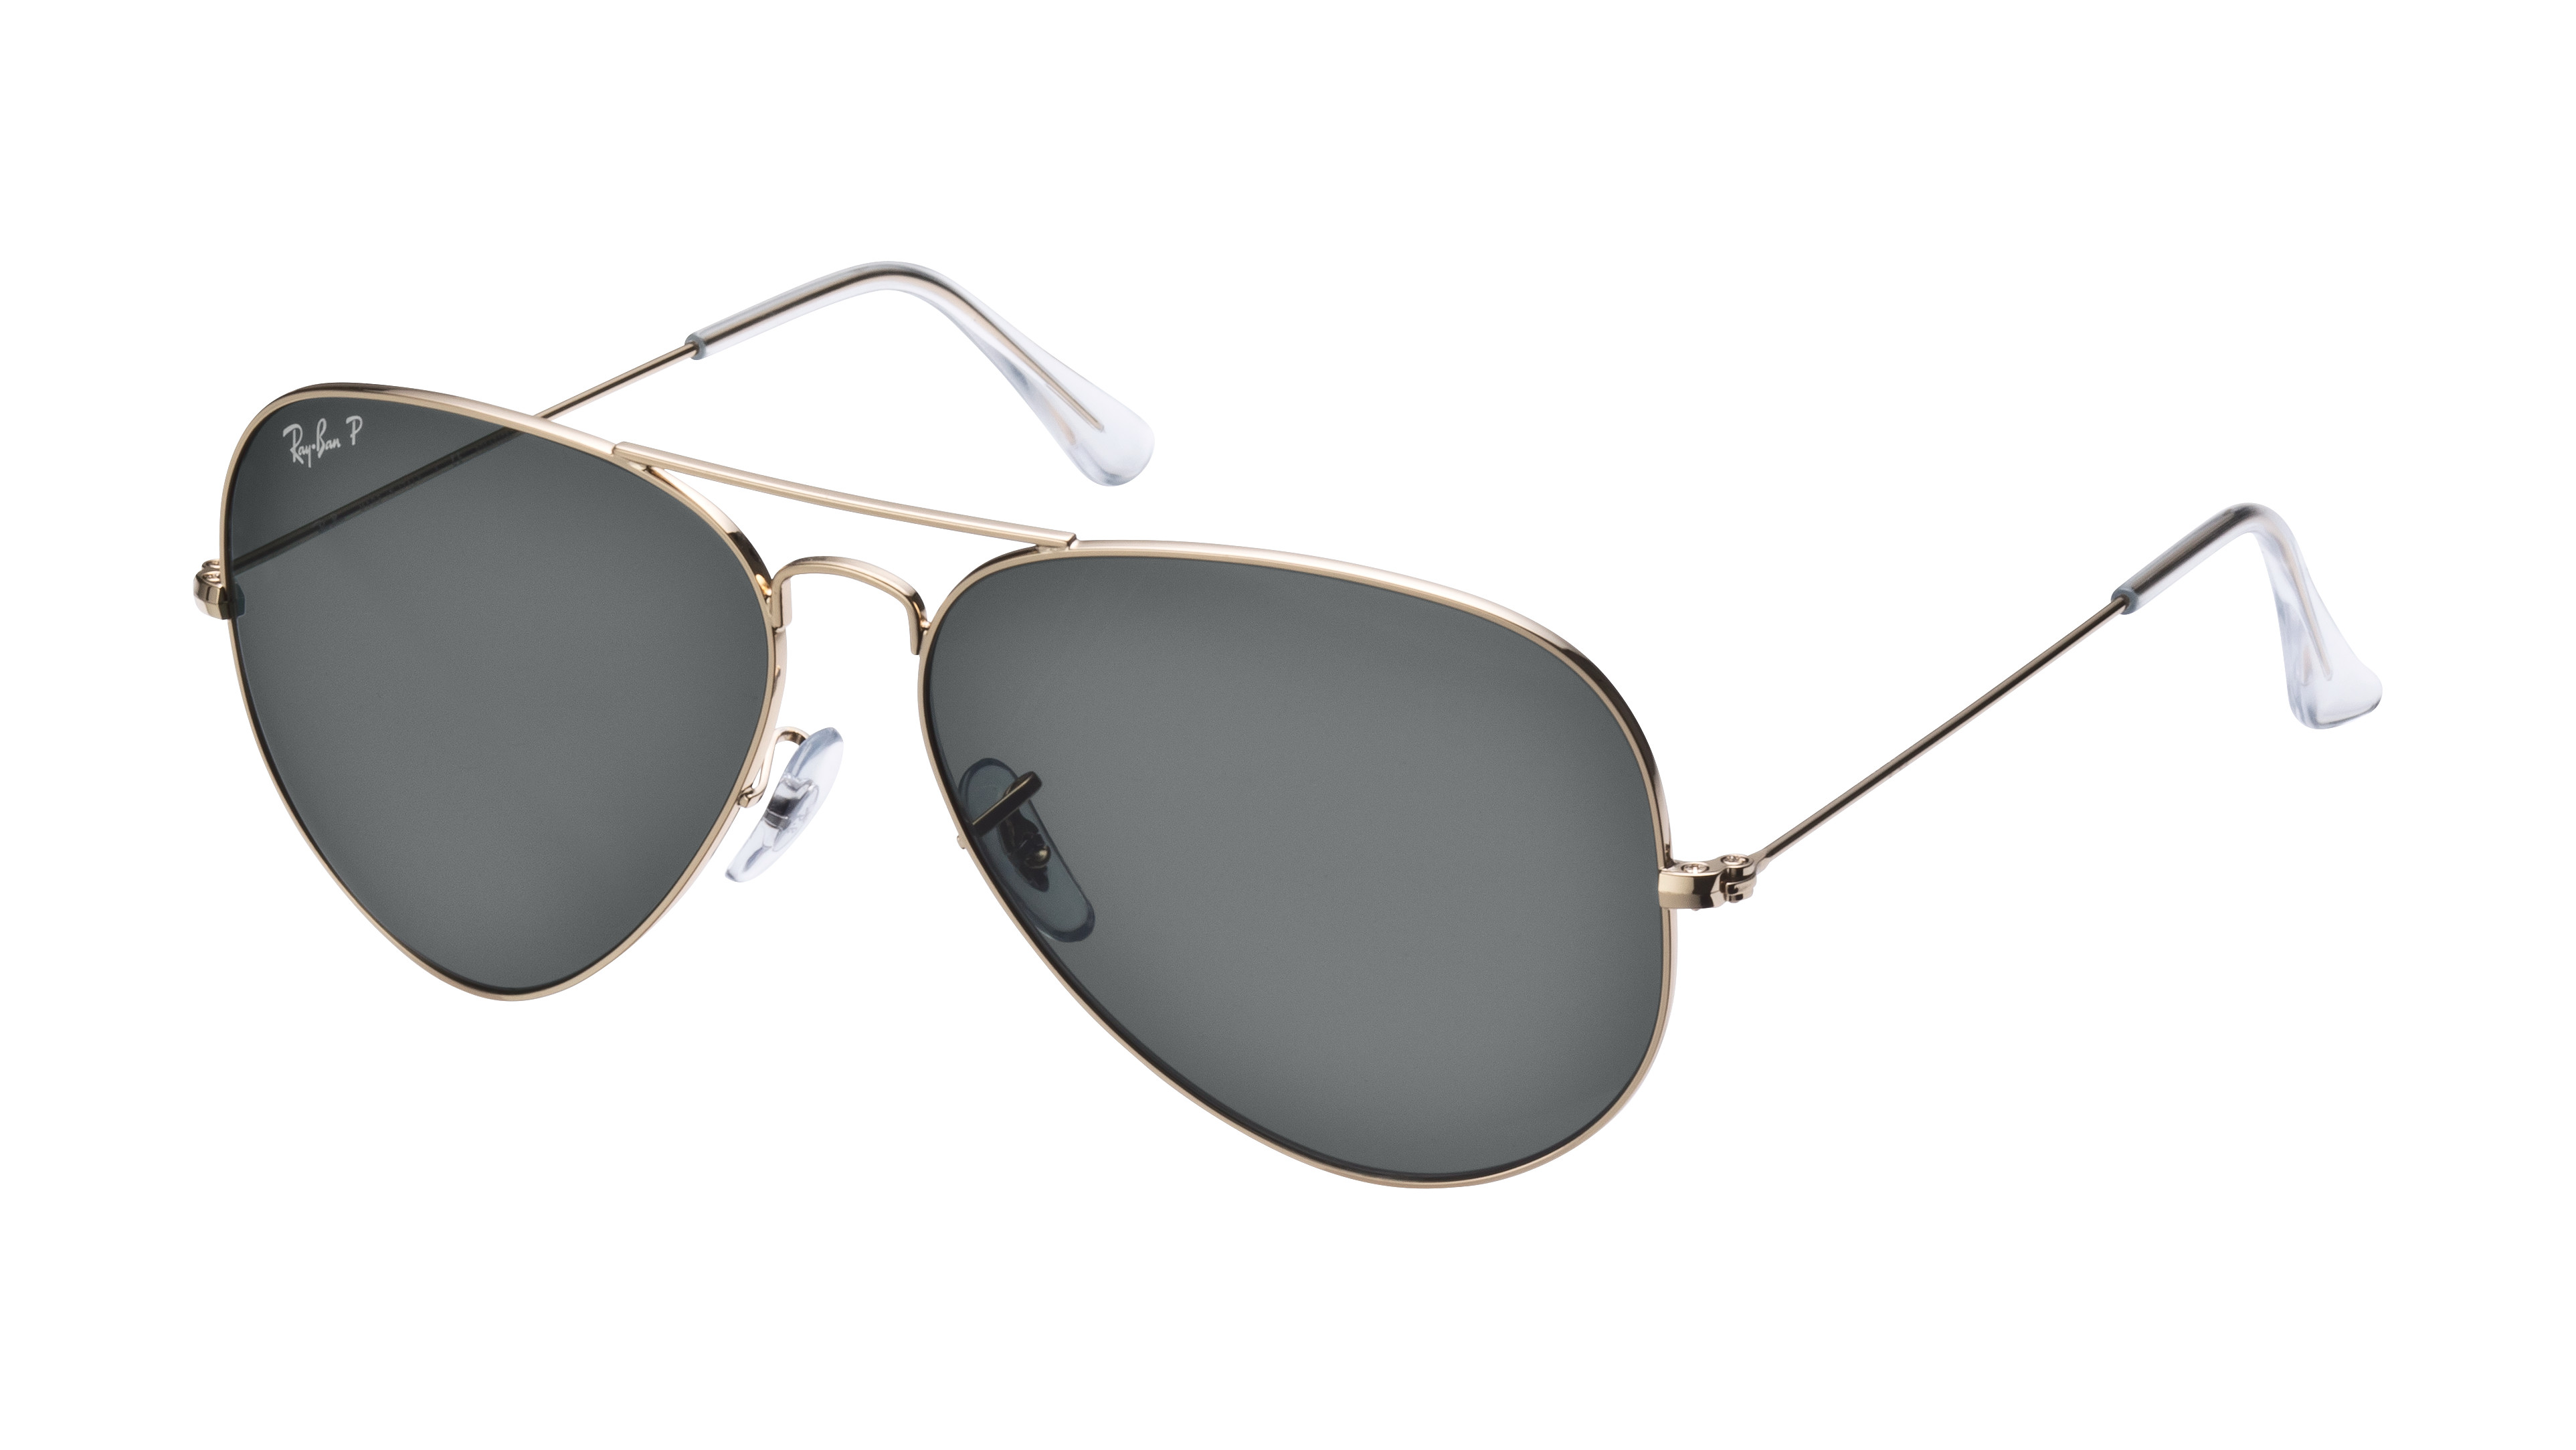 [products.image.angle_left01] Ray-Ban AVIATOR LARGE METAL 0RB3025 001/58 Sonnenbrille